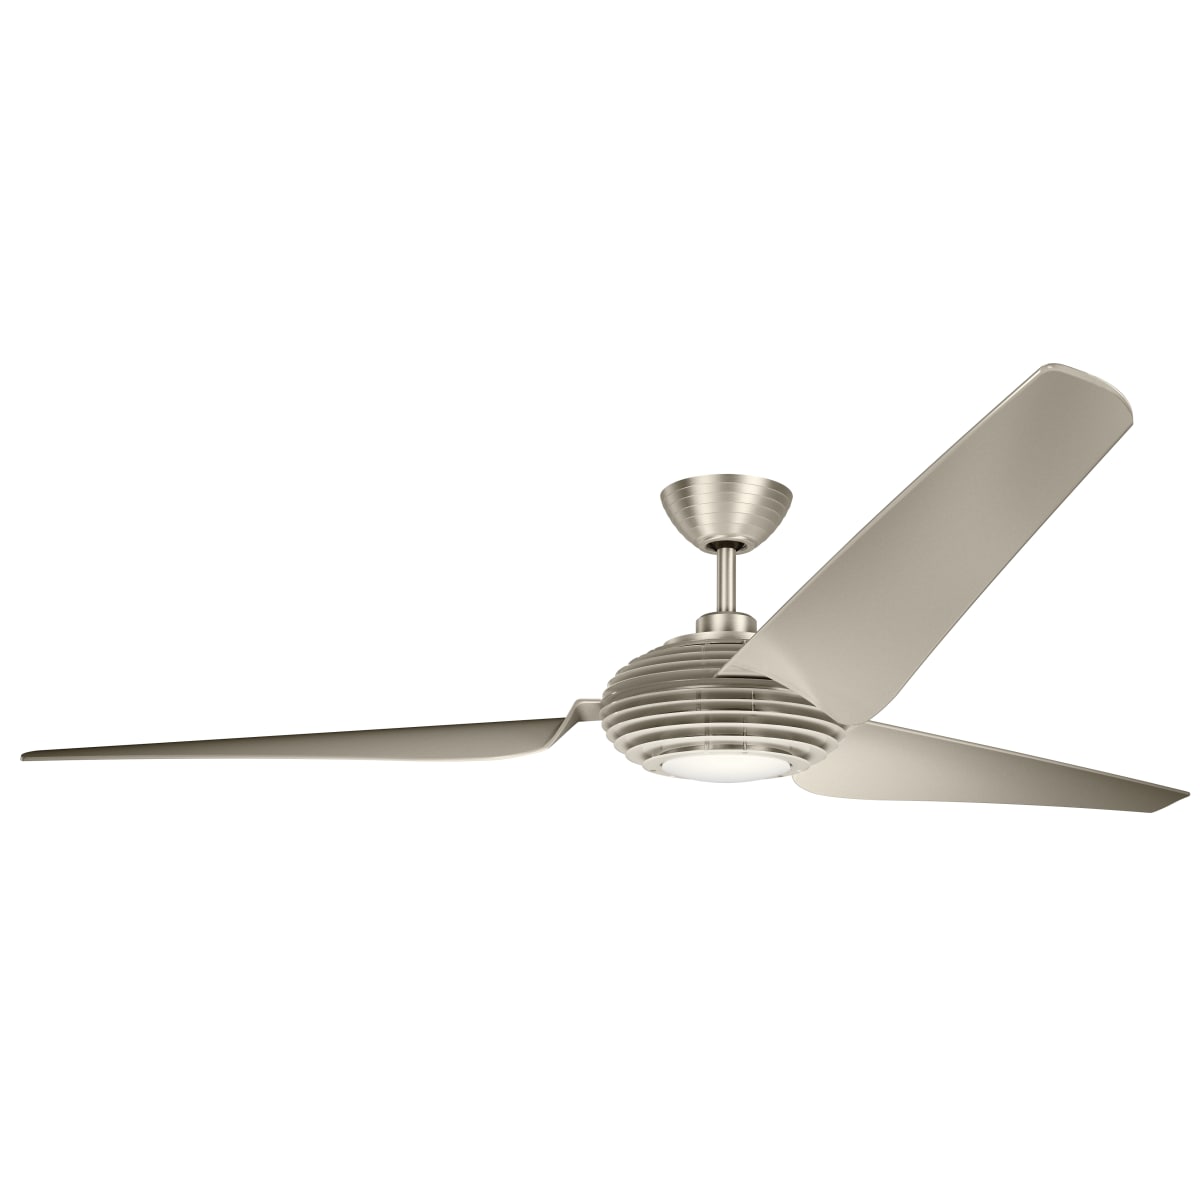 Kichler Voya 84" Ceiling Fan with LED Light and Wall Control White 